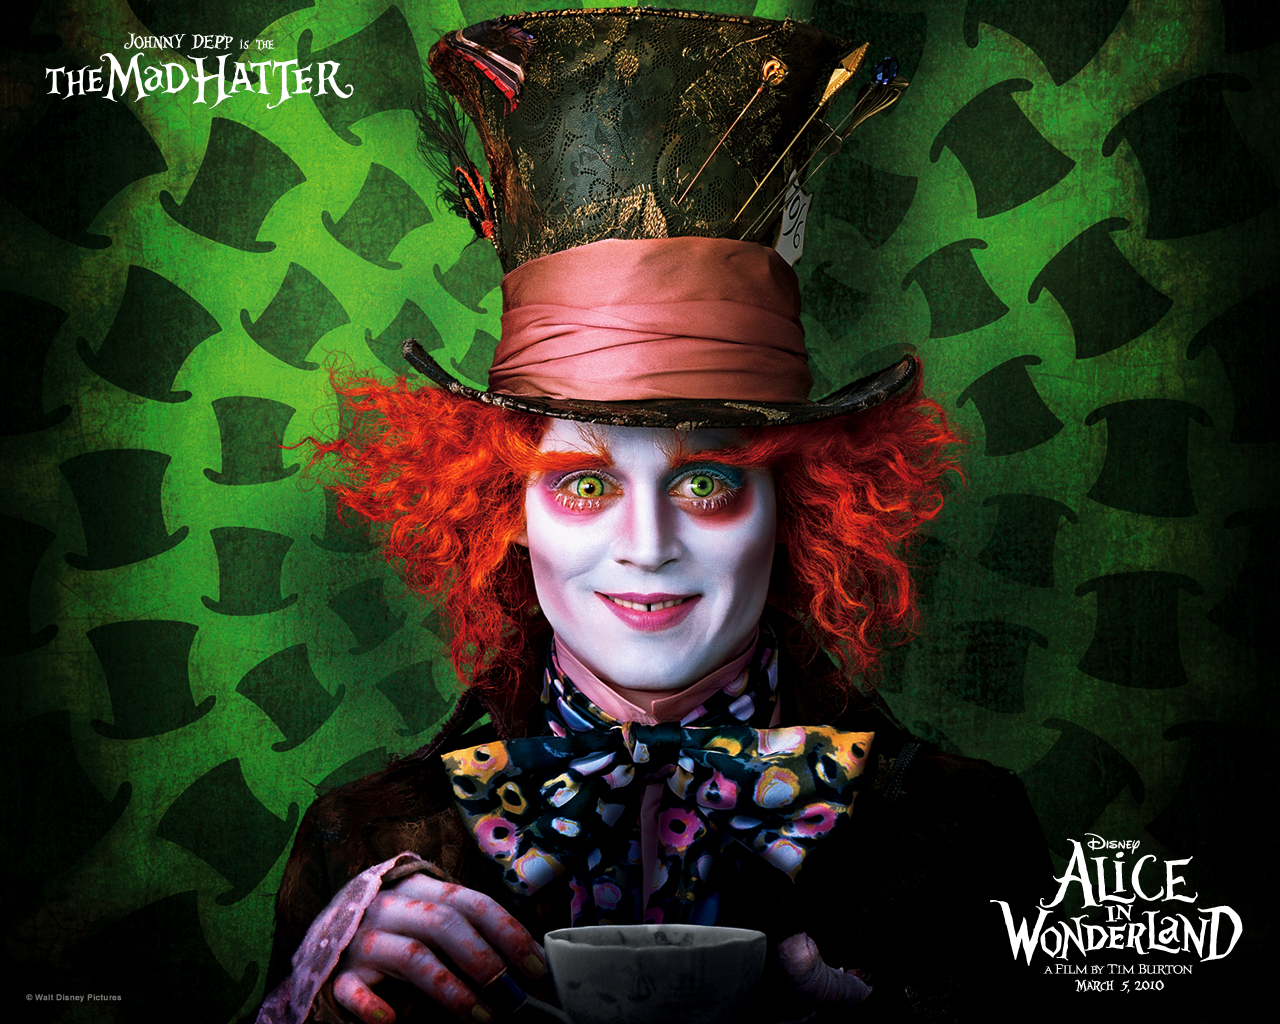 Download the The Mad Hatter Wallpaper, The Mad Hatter iPhone